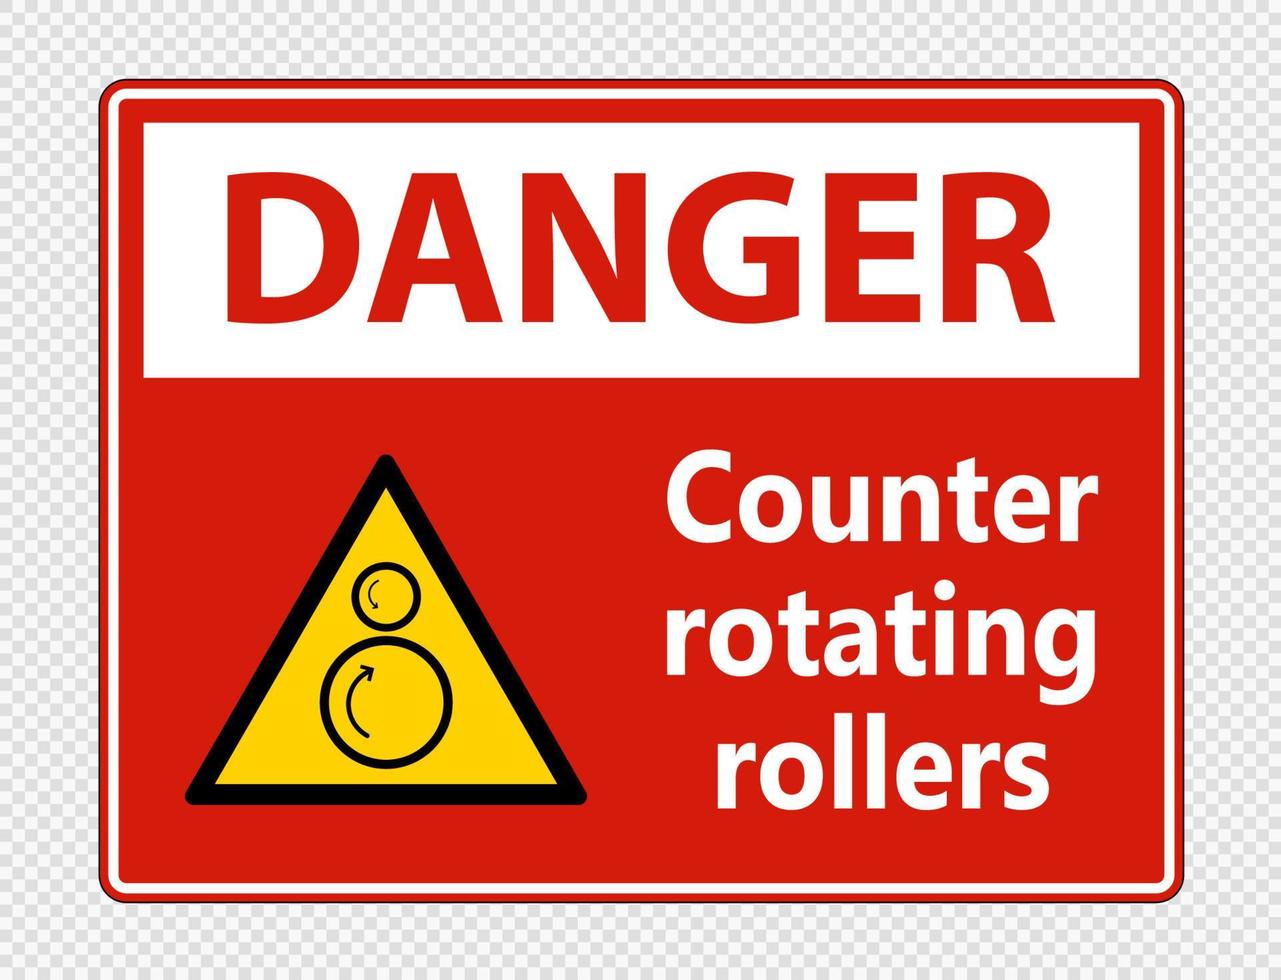 Danger counter rotating rollers sign on transparent background vector